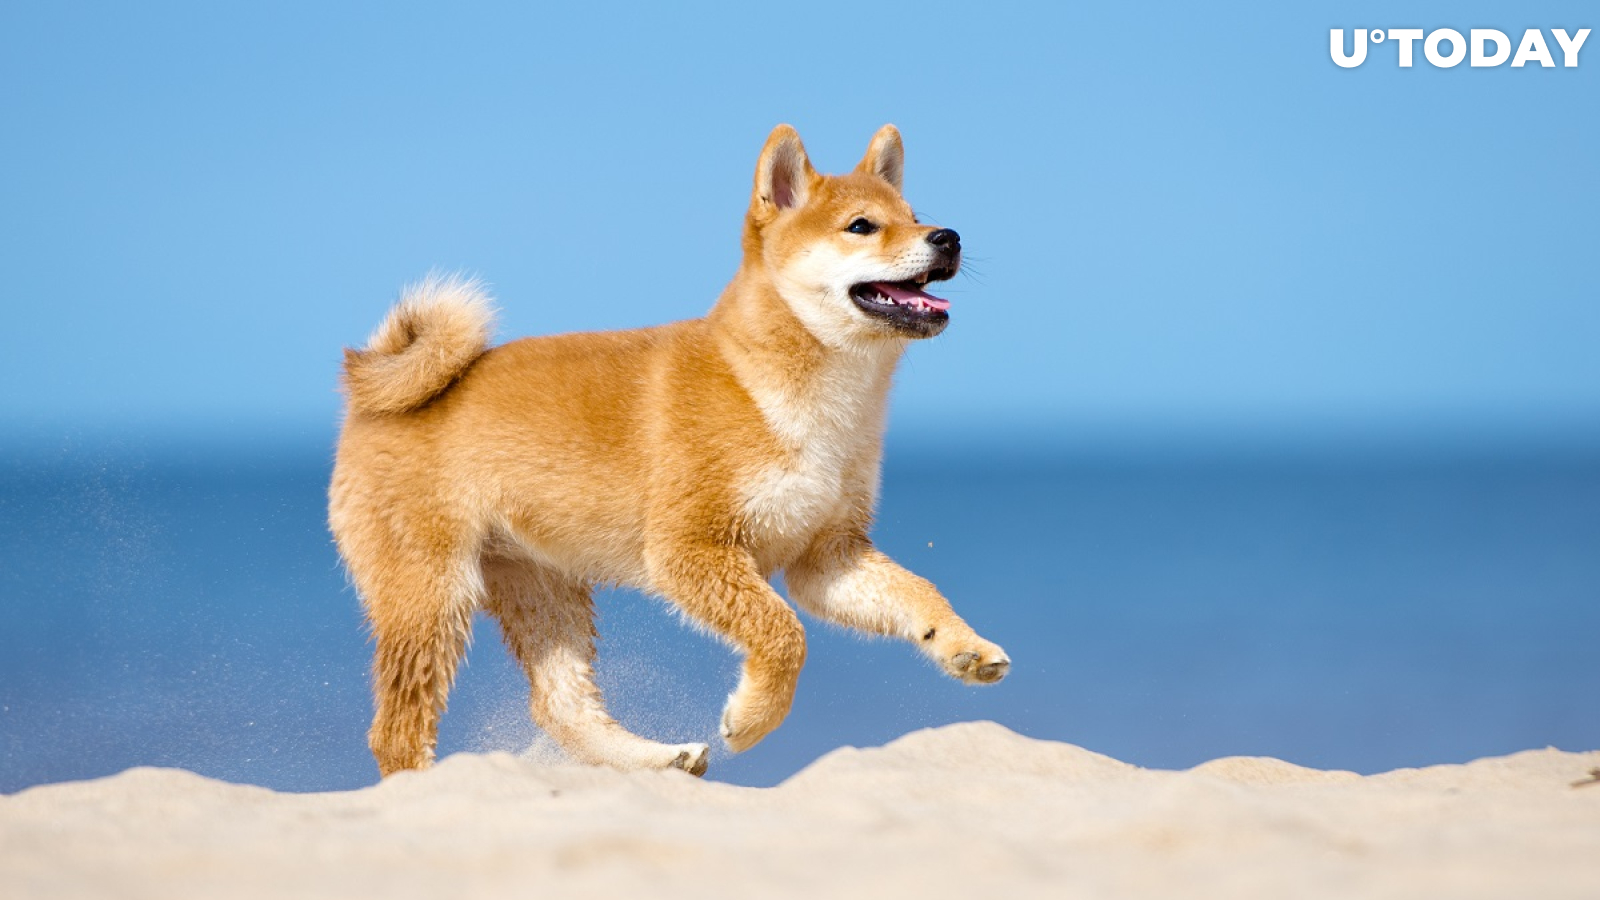 Dogecoin Killer Shiba Inu Can Now Be Used for Booking Over 2 Million Hotels